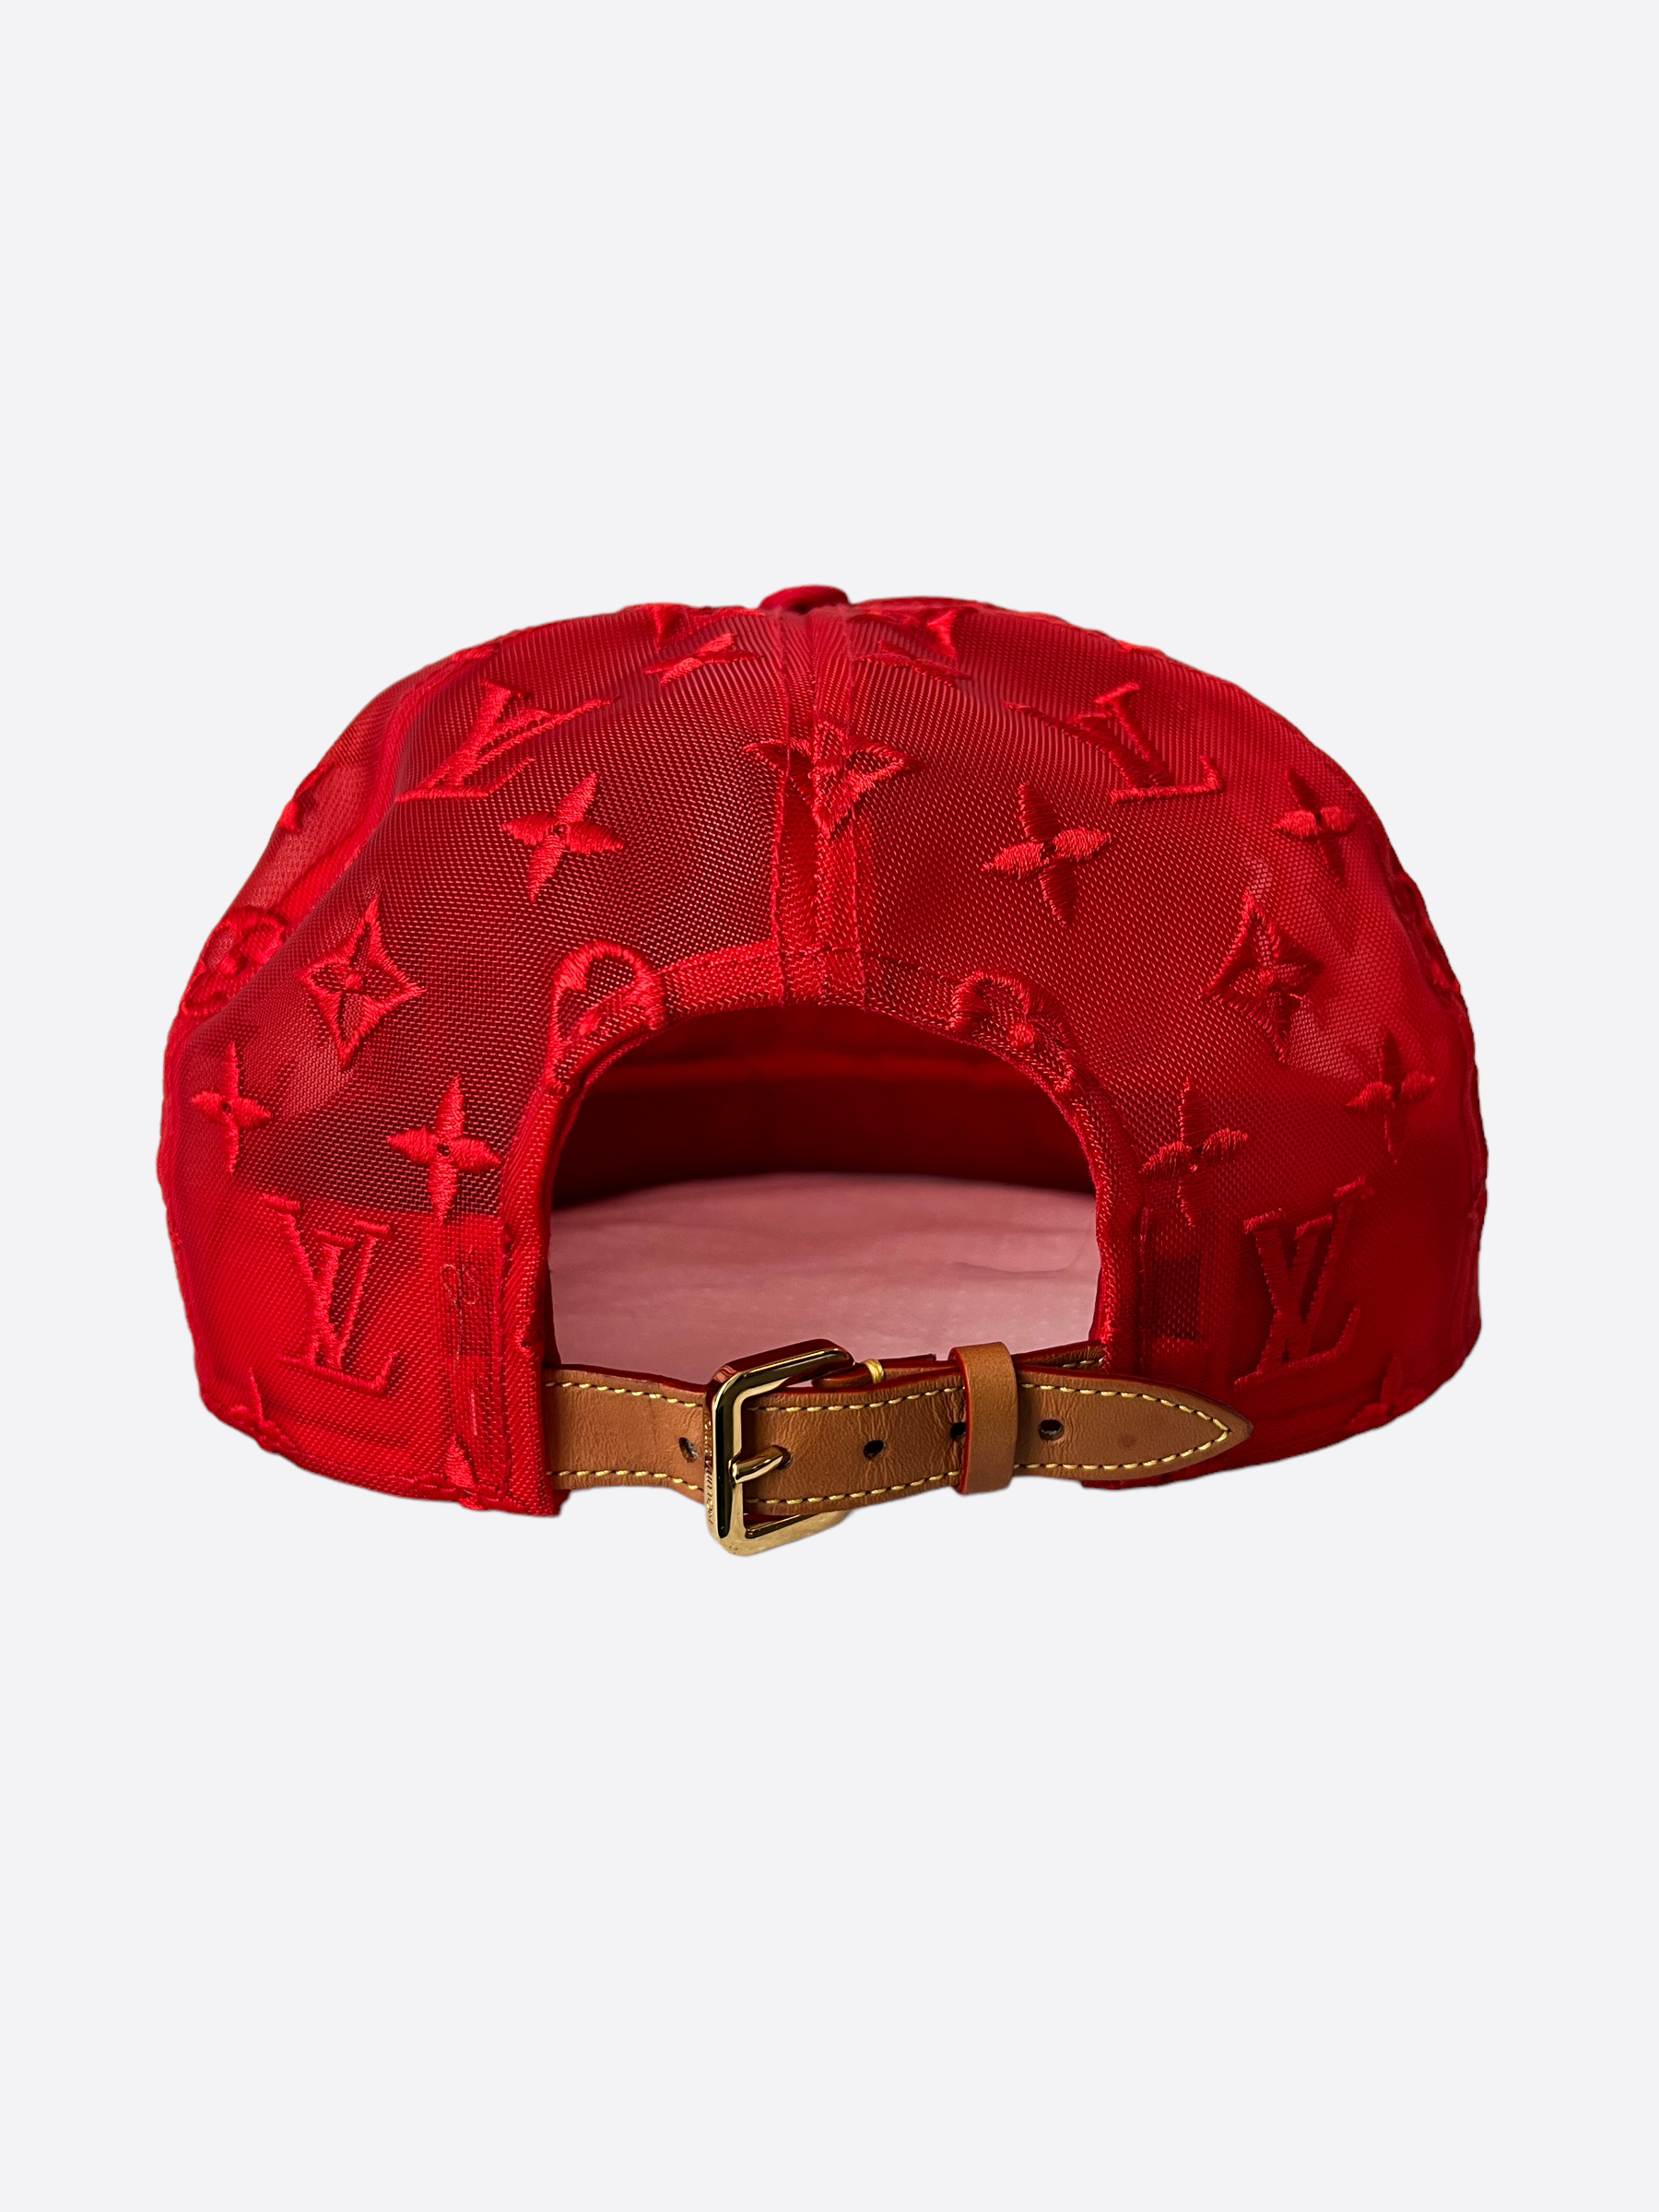 Louis Vuitton Everyday LV Embroidered Mesh Cap (Soho Exclusive) Red